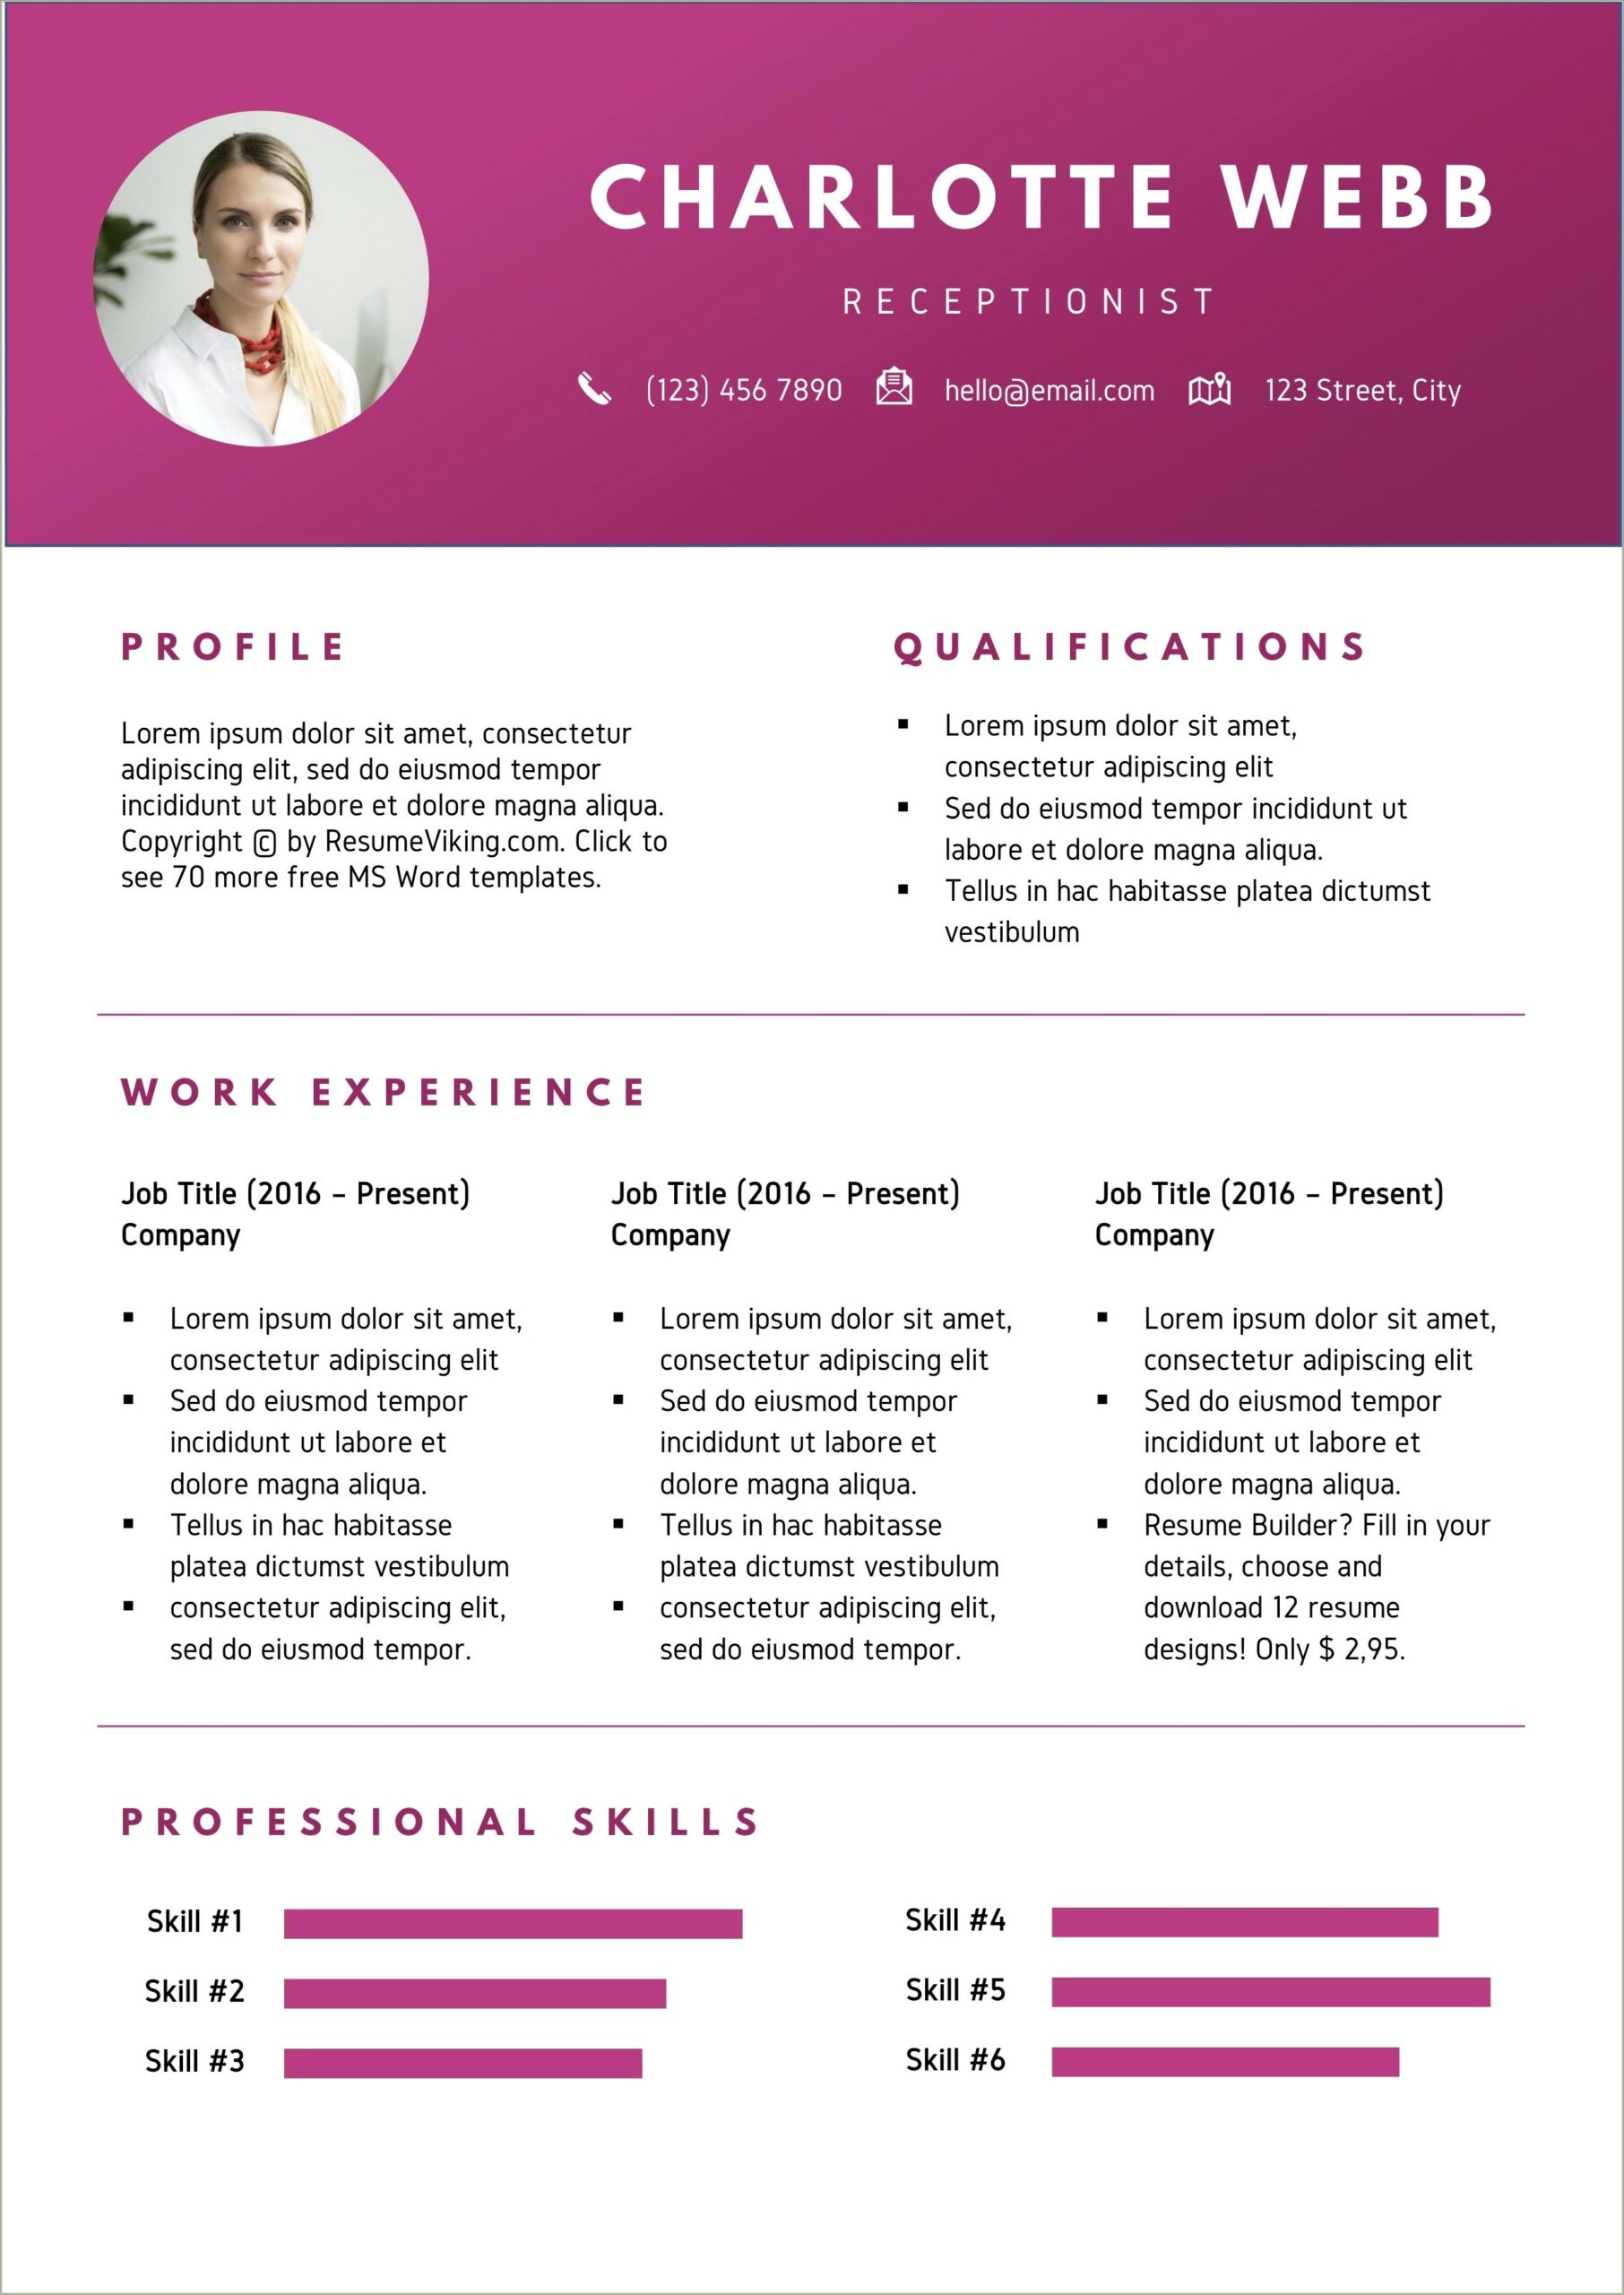 Resume Format For Freshers Pdf Free Download